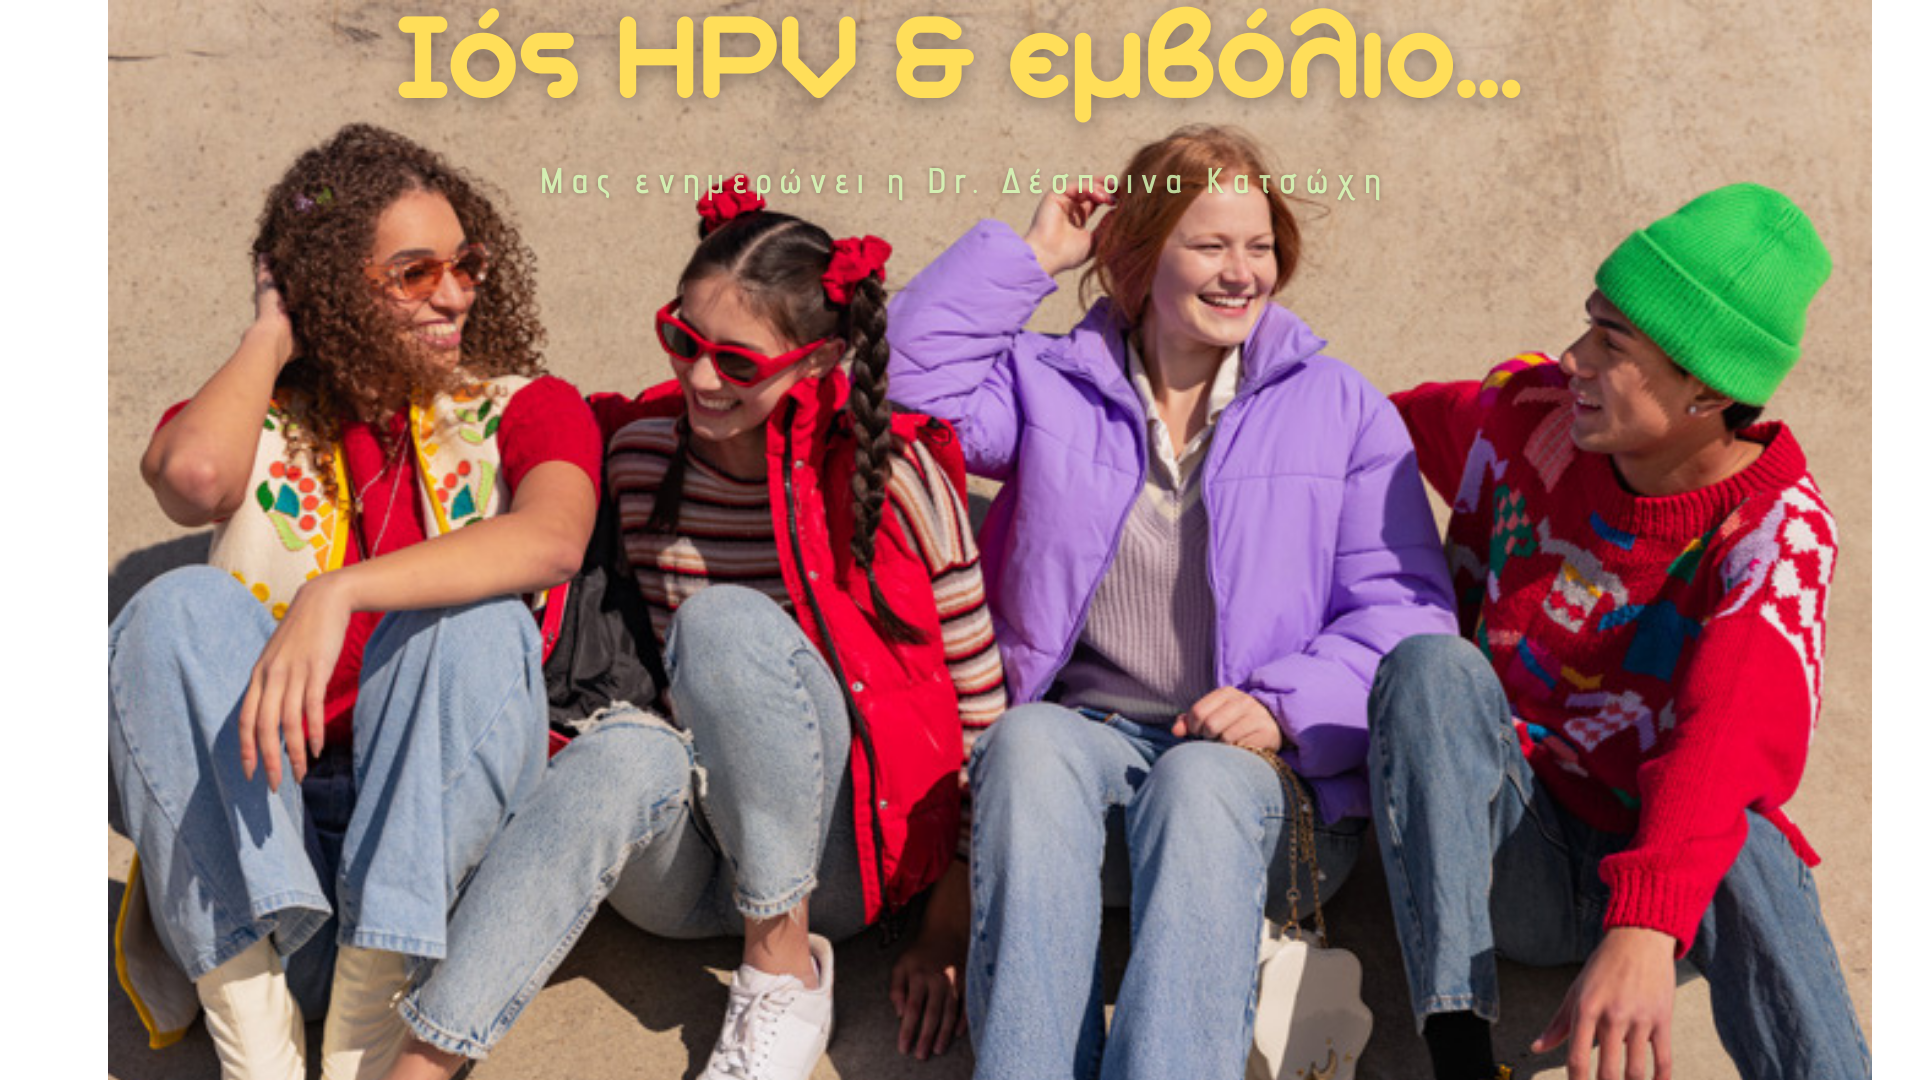 You are currently viewing Ο ιός HPV και το εμβόλιο κατά του HPV.